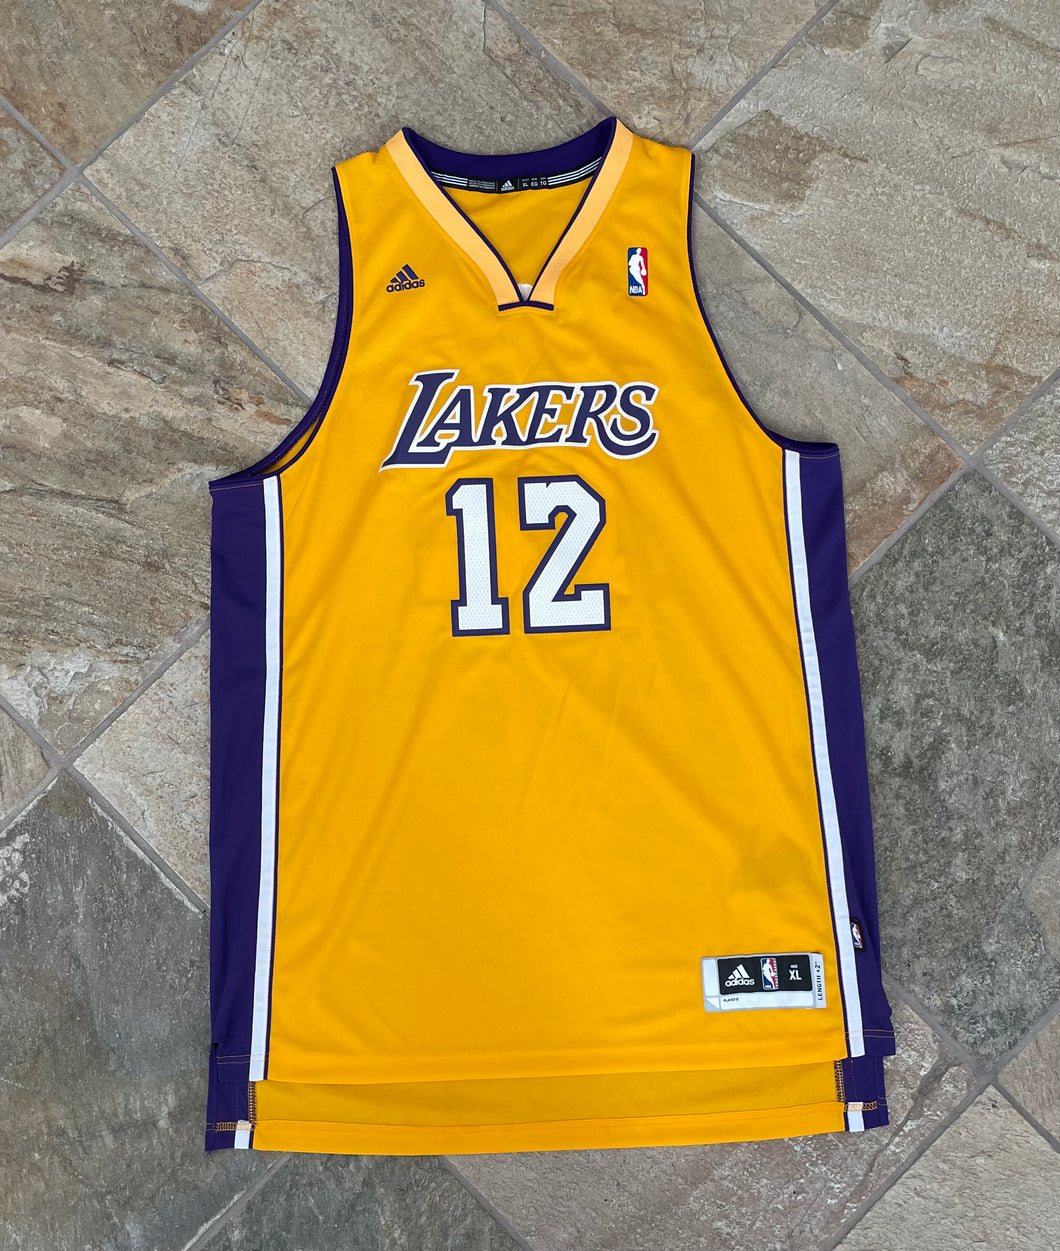 Vintage Los Angeles Lakers Shannon Brown Adidas Basketball Jersey, Size XL